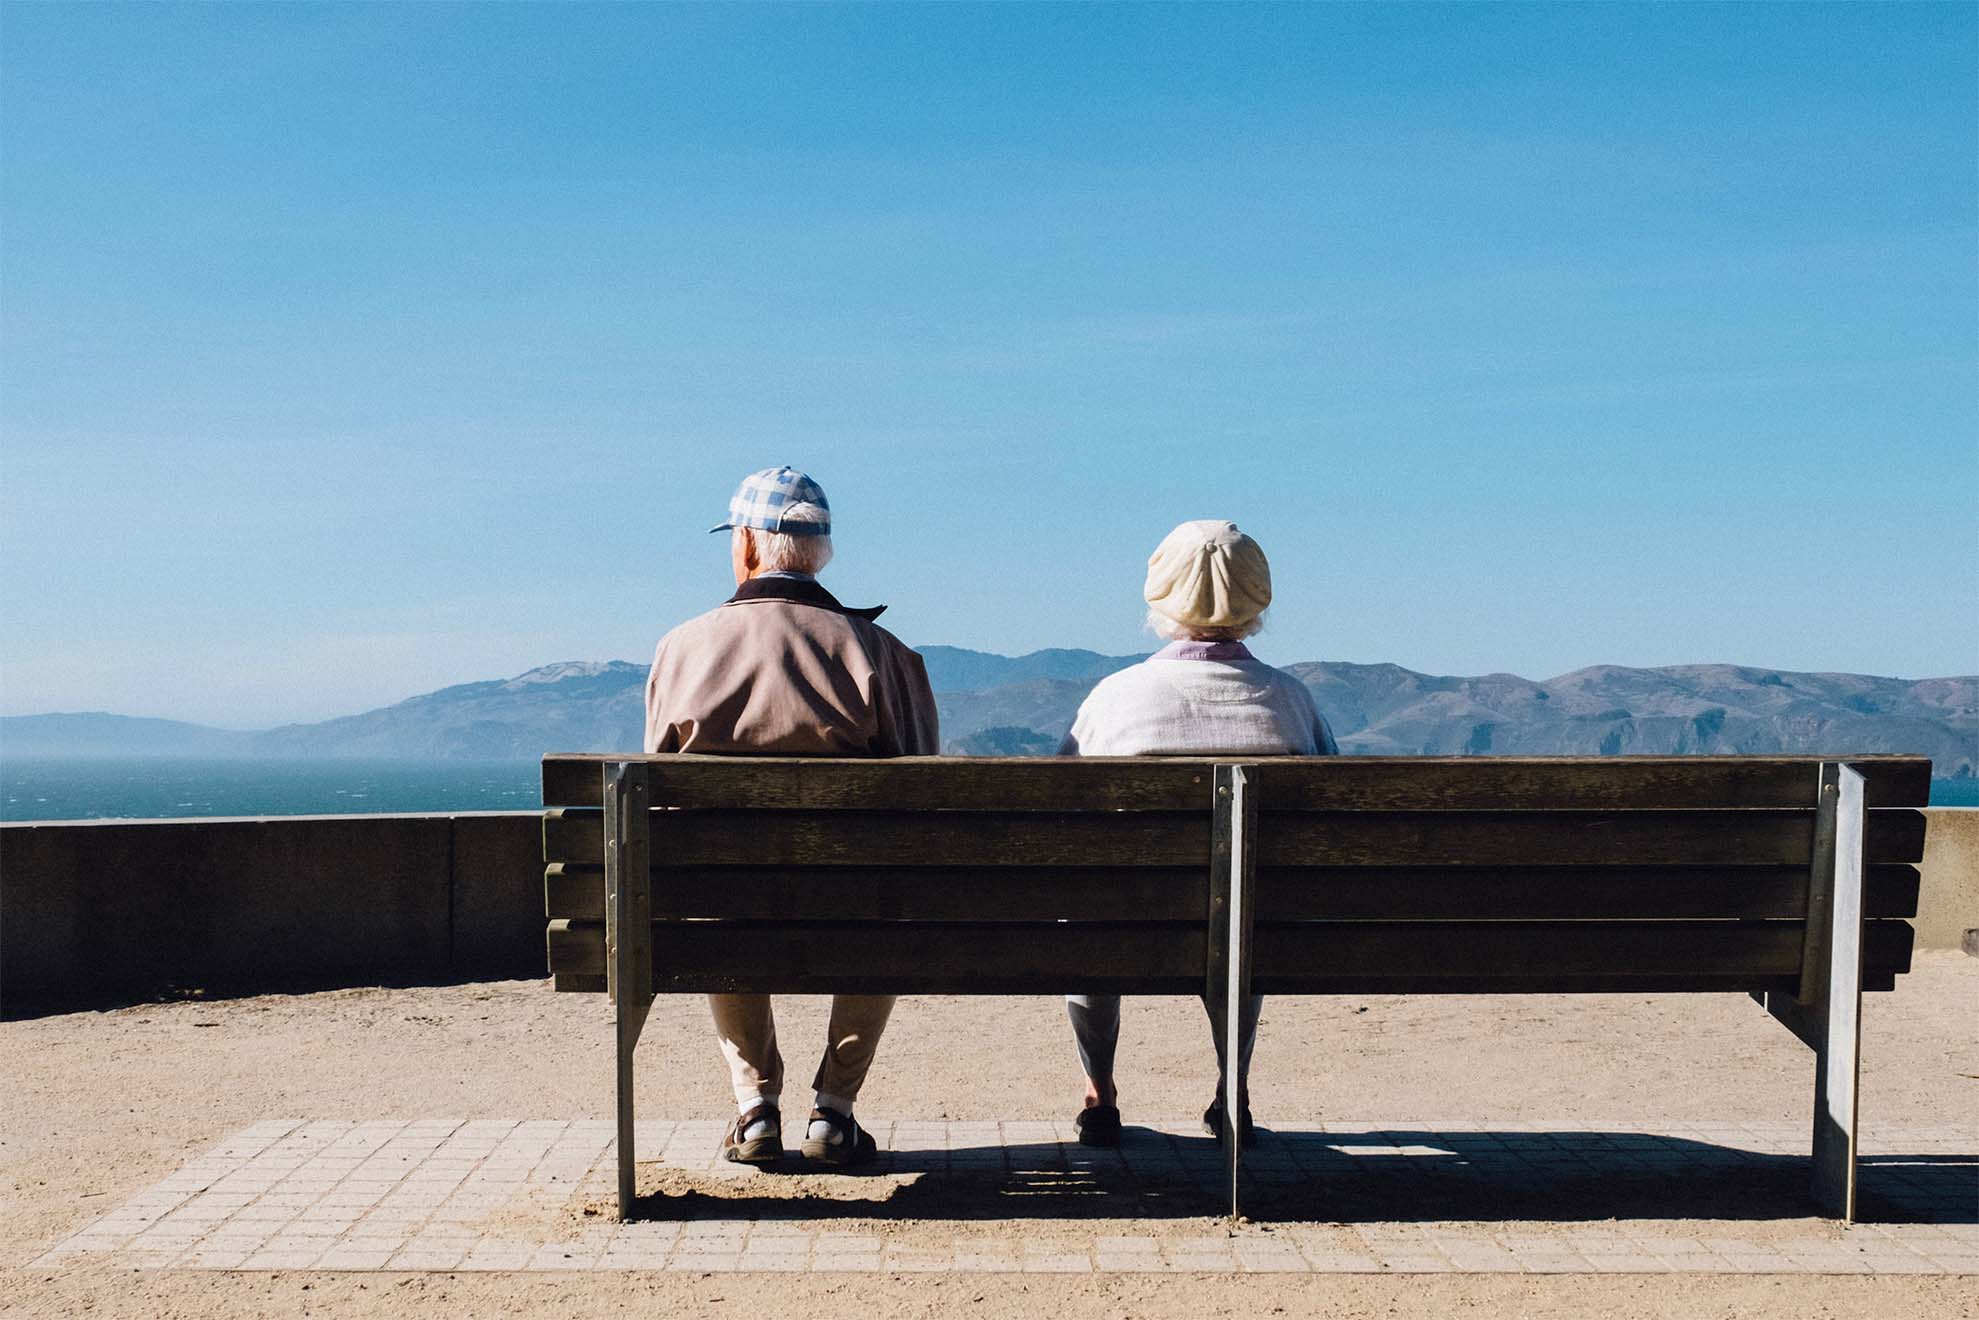 Two elderly people sat on a bench